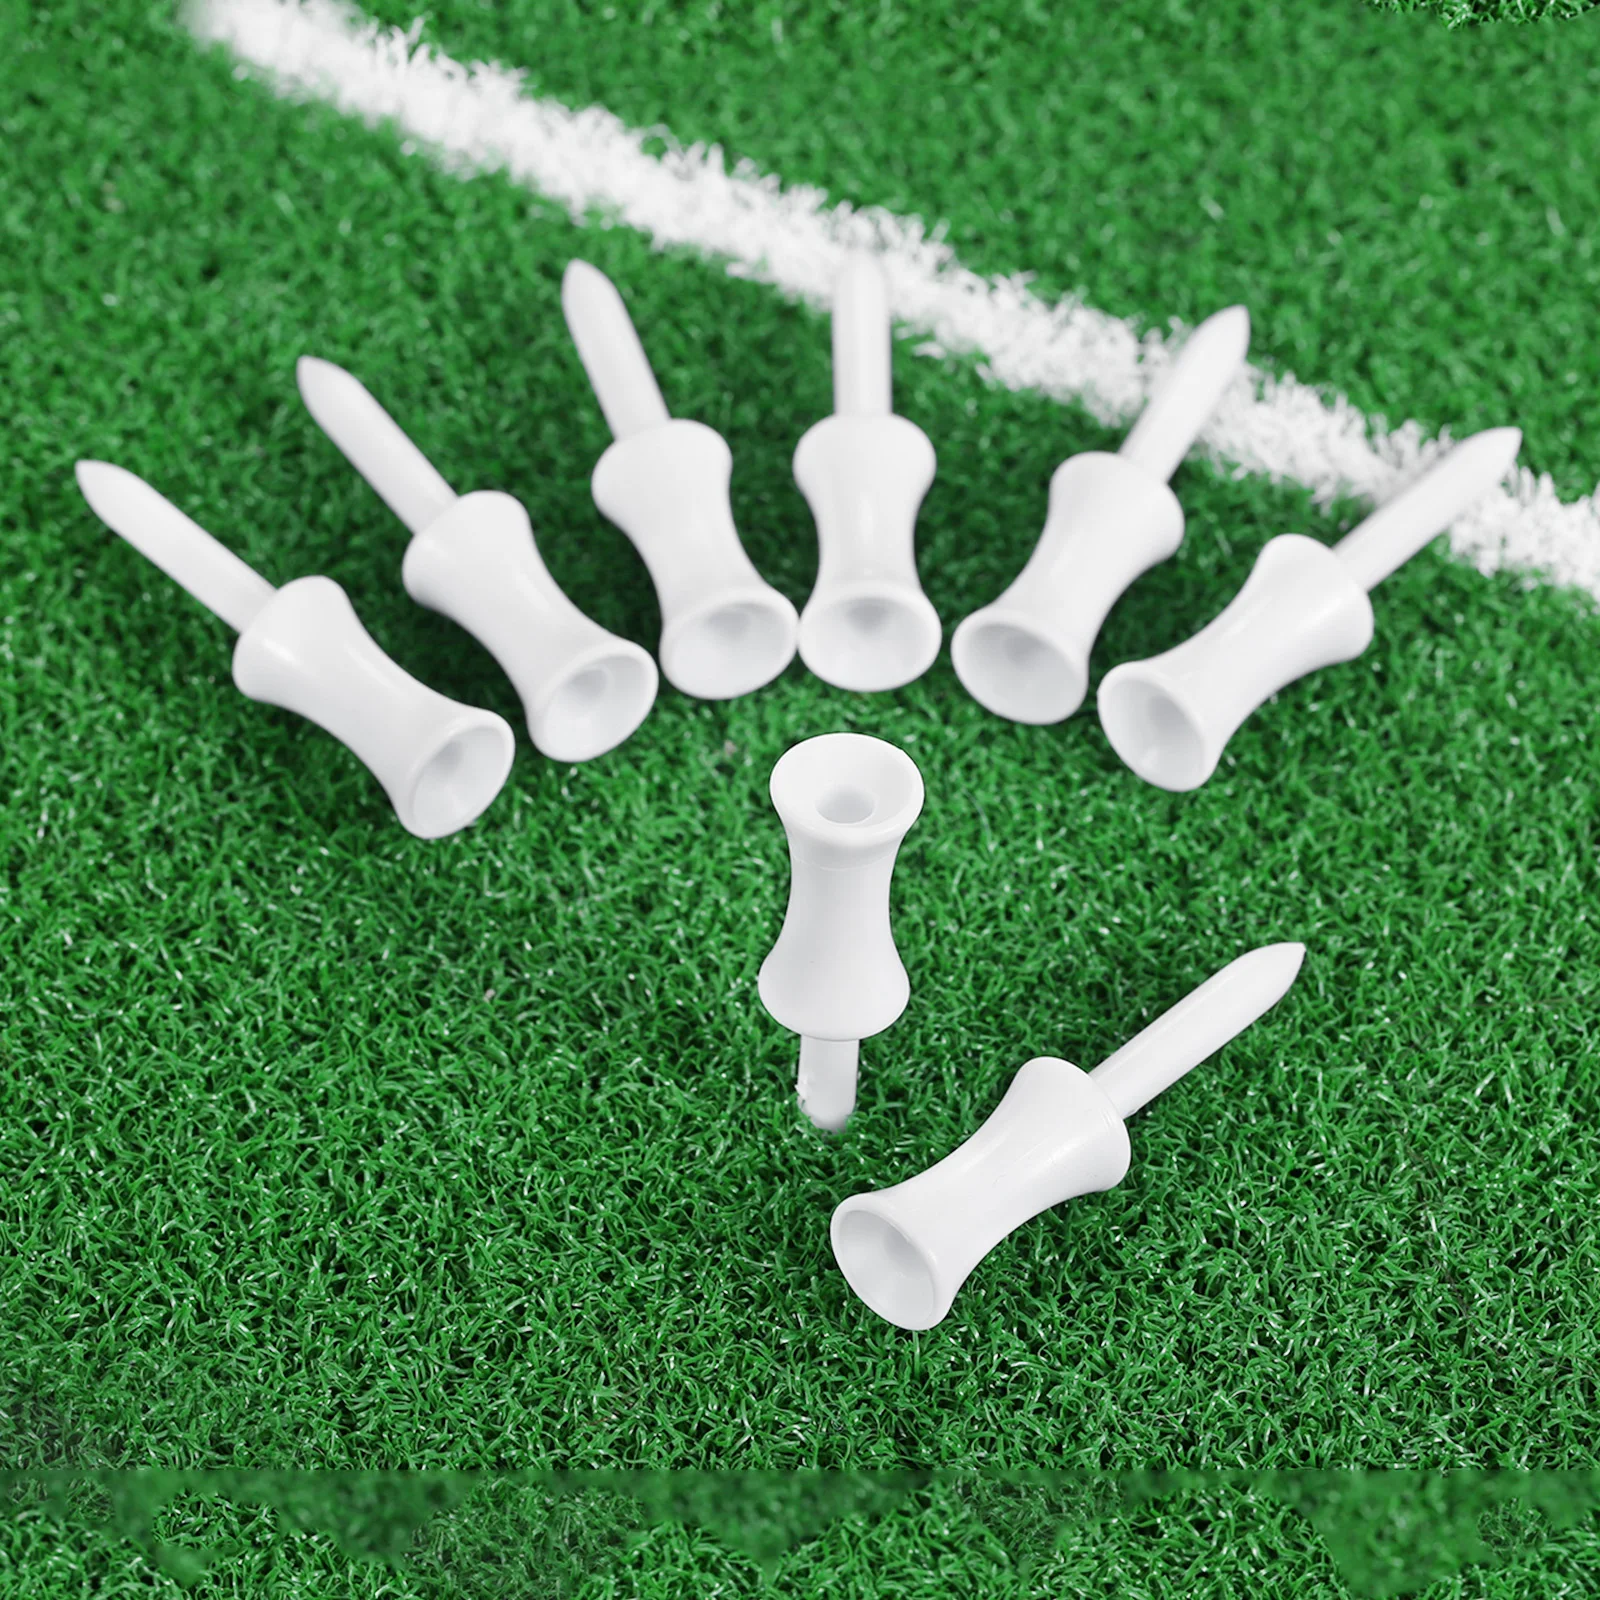 100pcs /Pack Plastic Step Down Golf Tees Graduated Castle Golf Tee Height Control 54mm White Golf Accessories Sports Club Tees